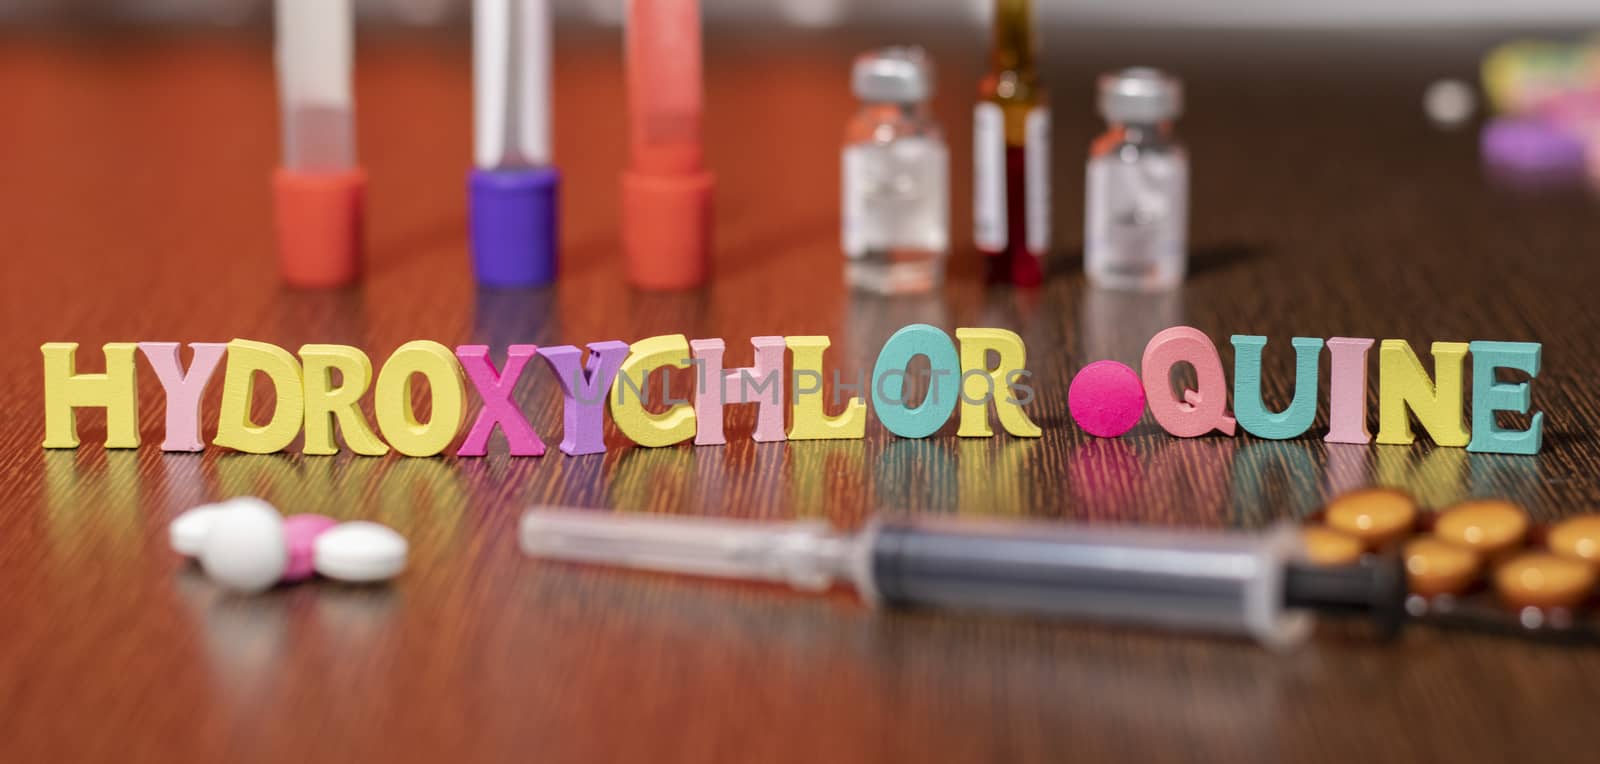 hydroxychloroquine or HCQ drug in colourful letters on table used for malaria. by lakshmiprasad.maski@gmai.com